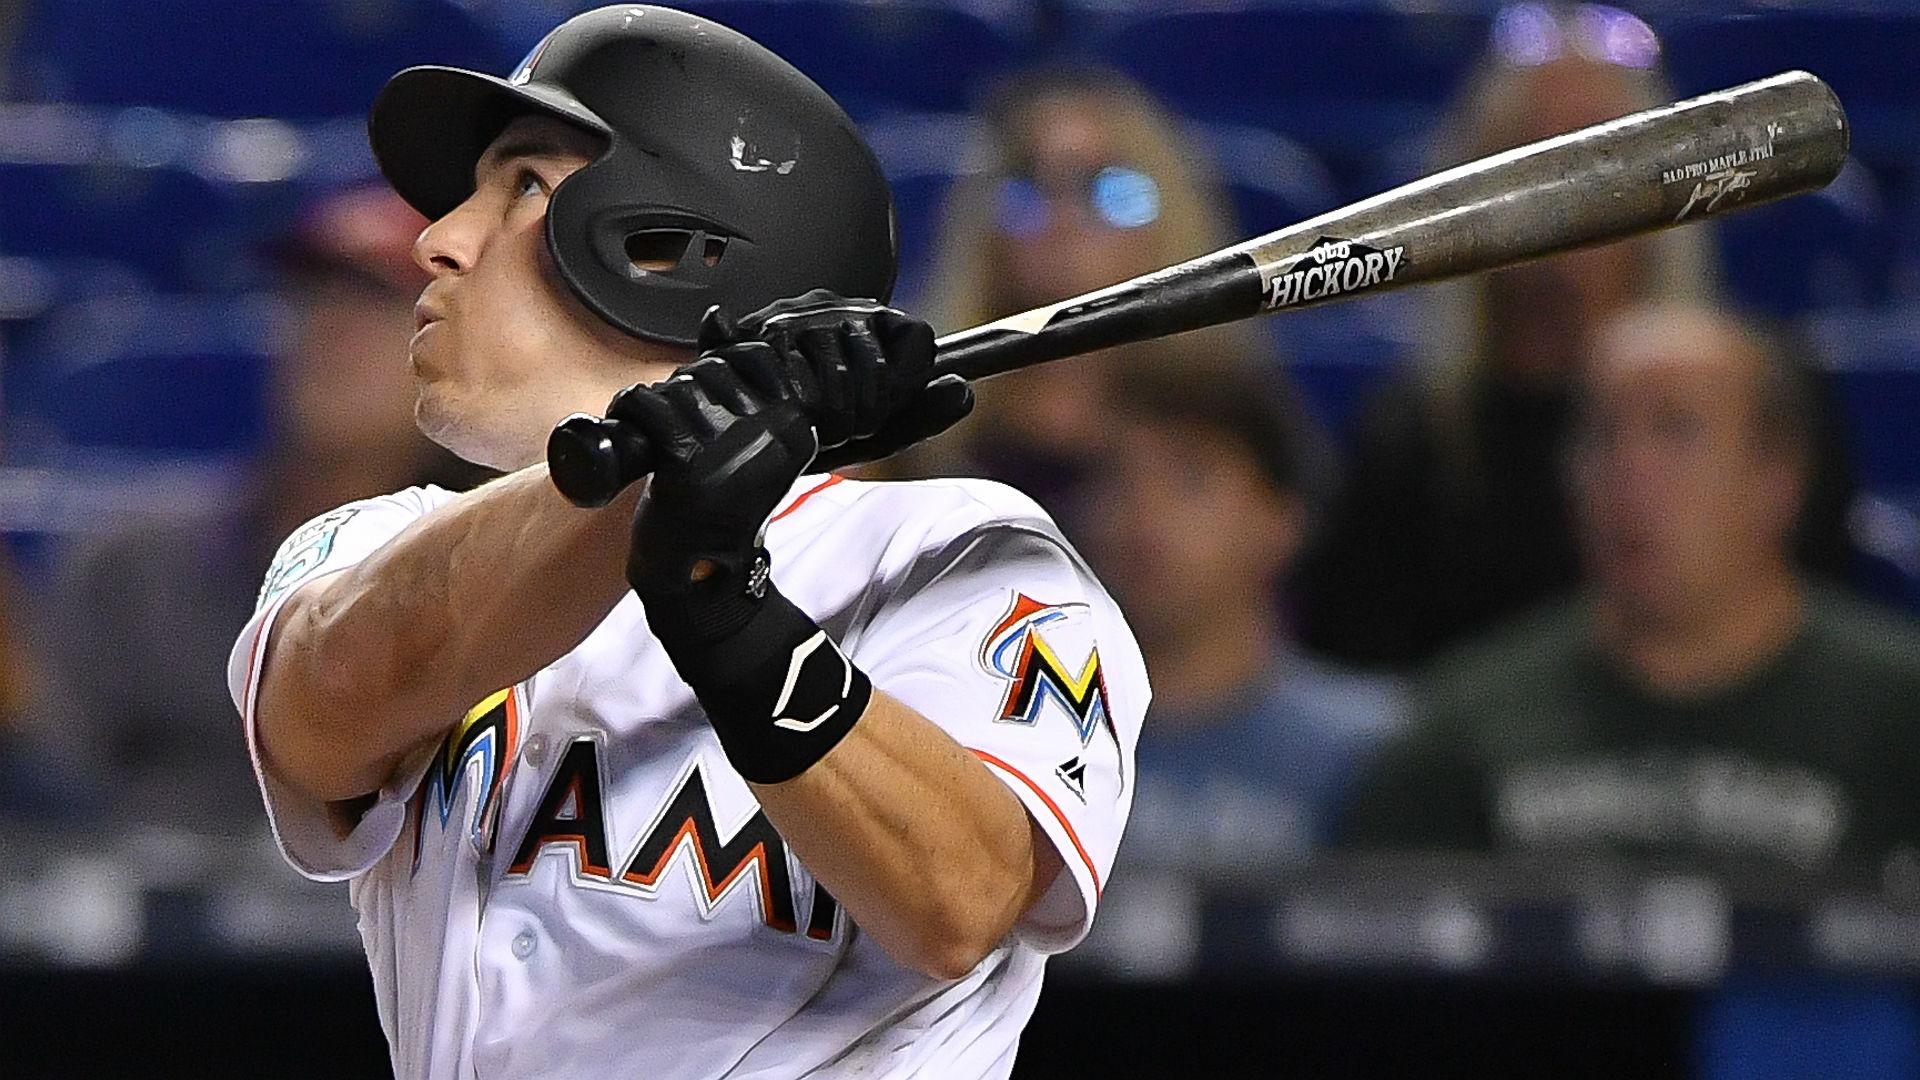 MLB hot stove: Phillies acquire J.T. Realmuto from Marlins. MLB